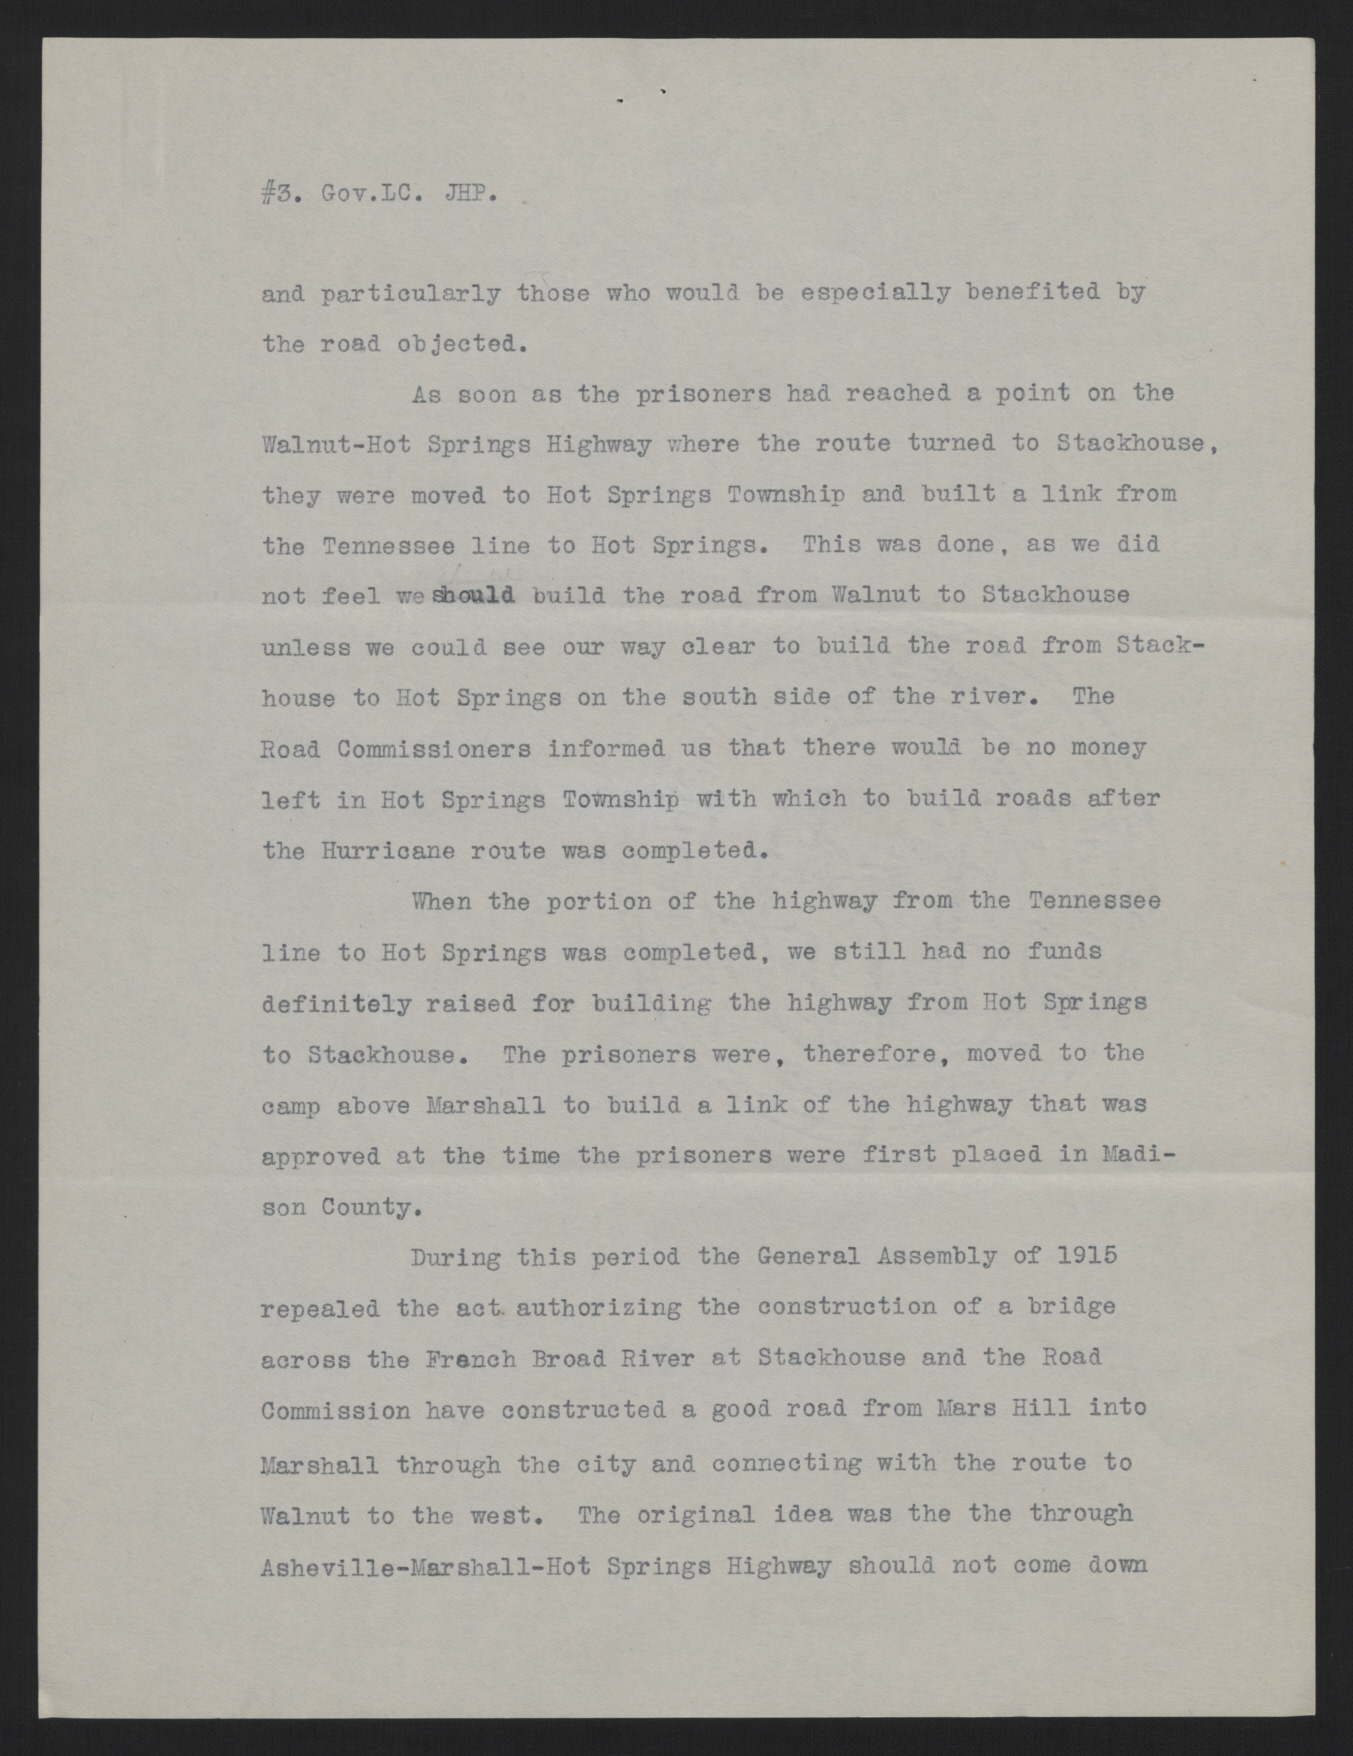 Letter from Pratt to Craig, March 30, 1916, page 3